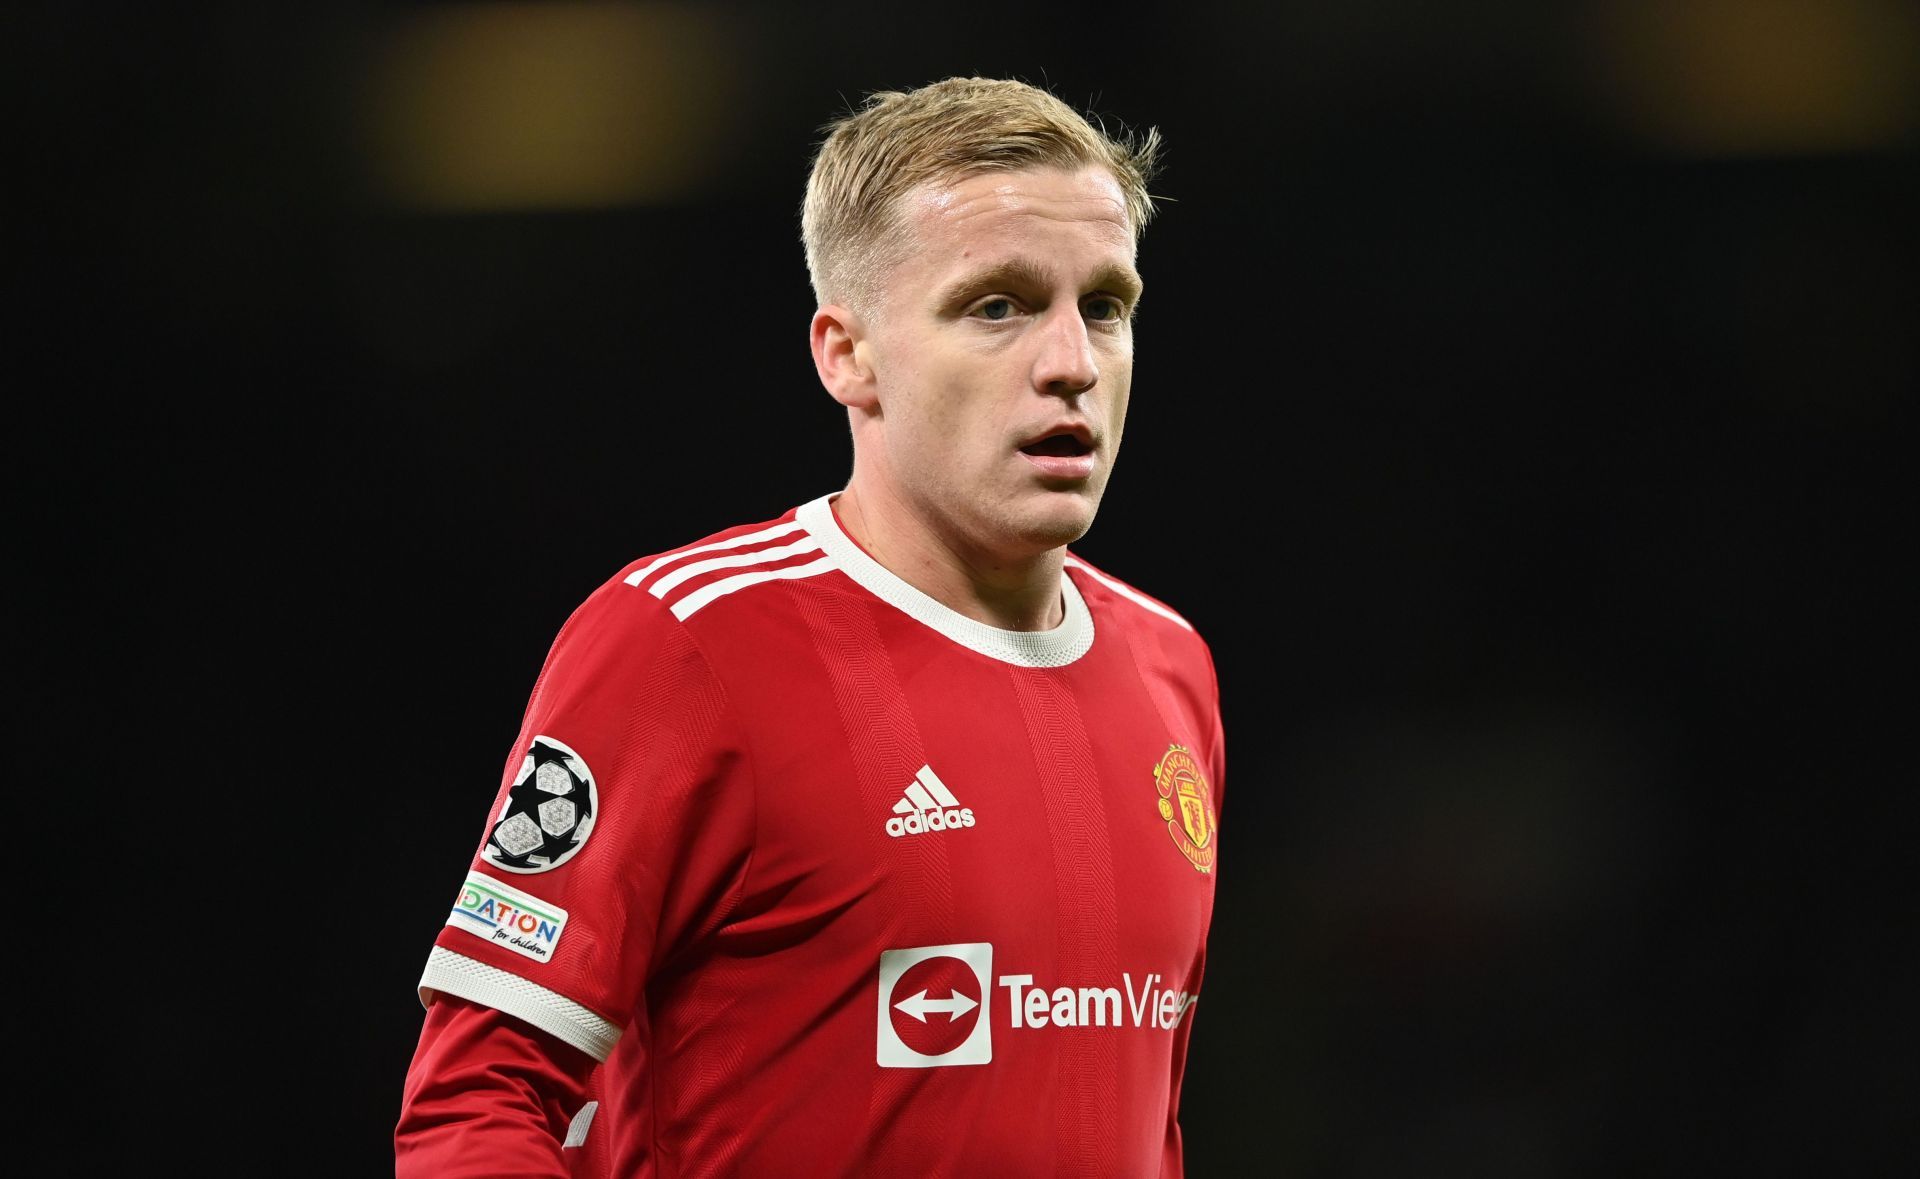 Donny van de Beek has joined Everton on loan for the rest of the season.